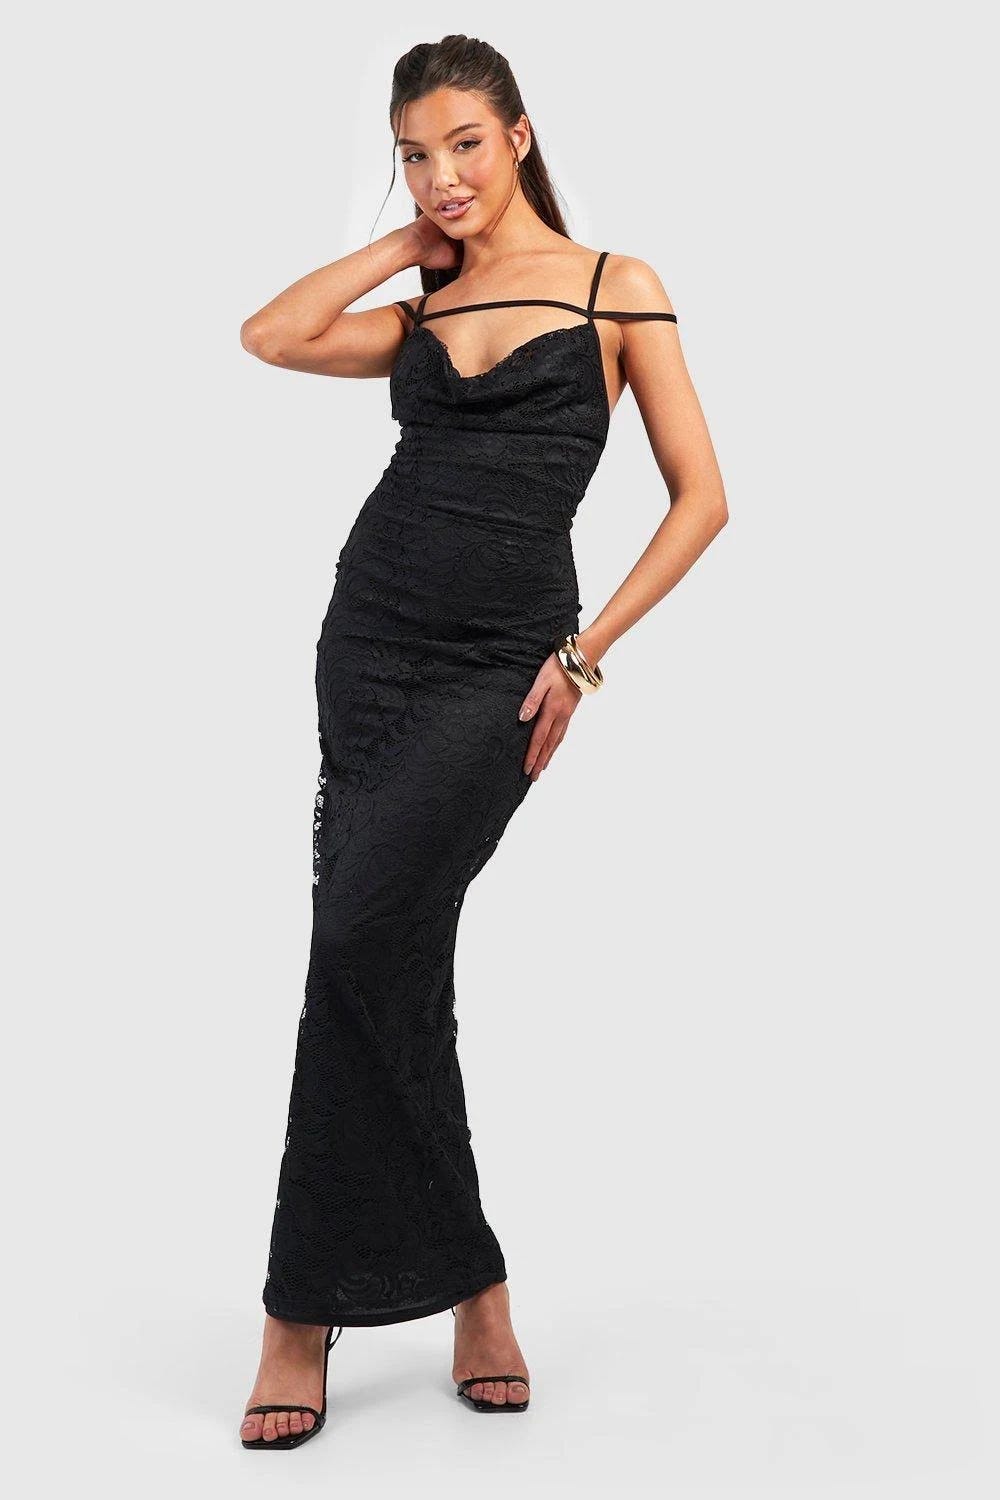 Maxi Black Lace Cowl Strappy Dress for Style and Comfort | Image